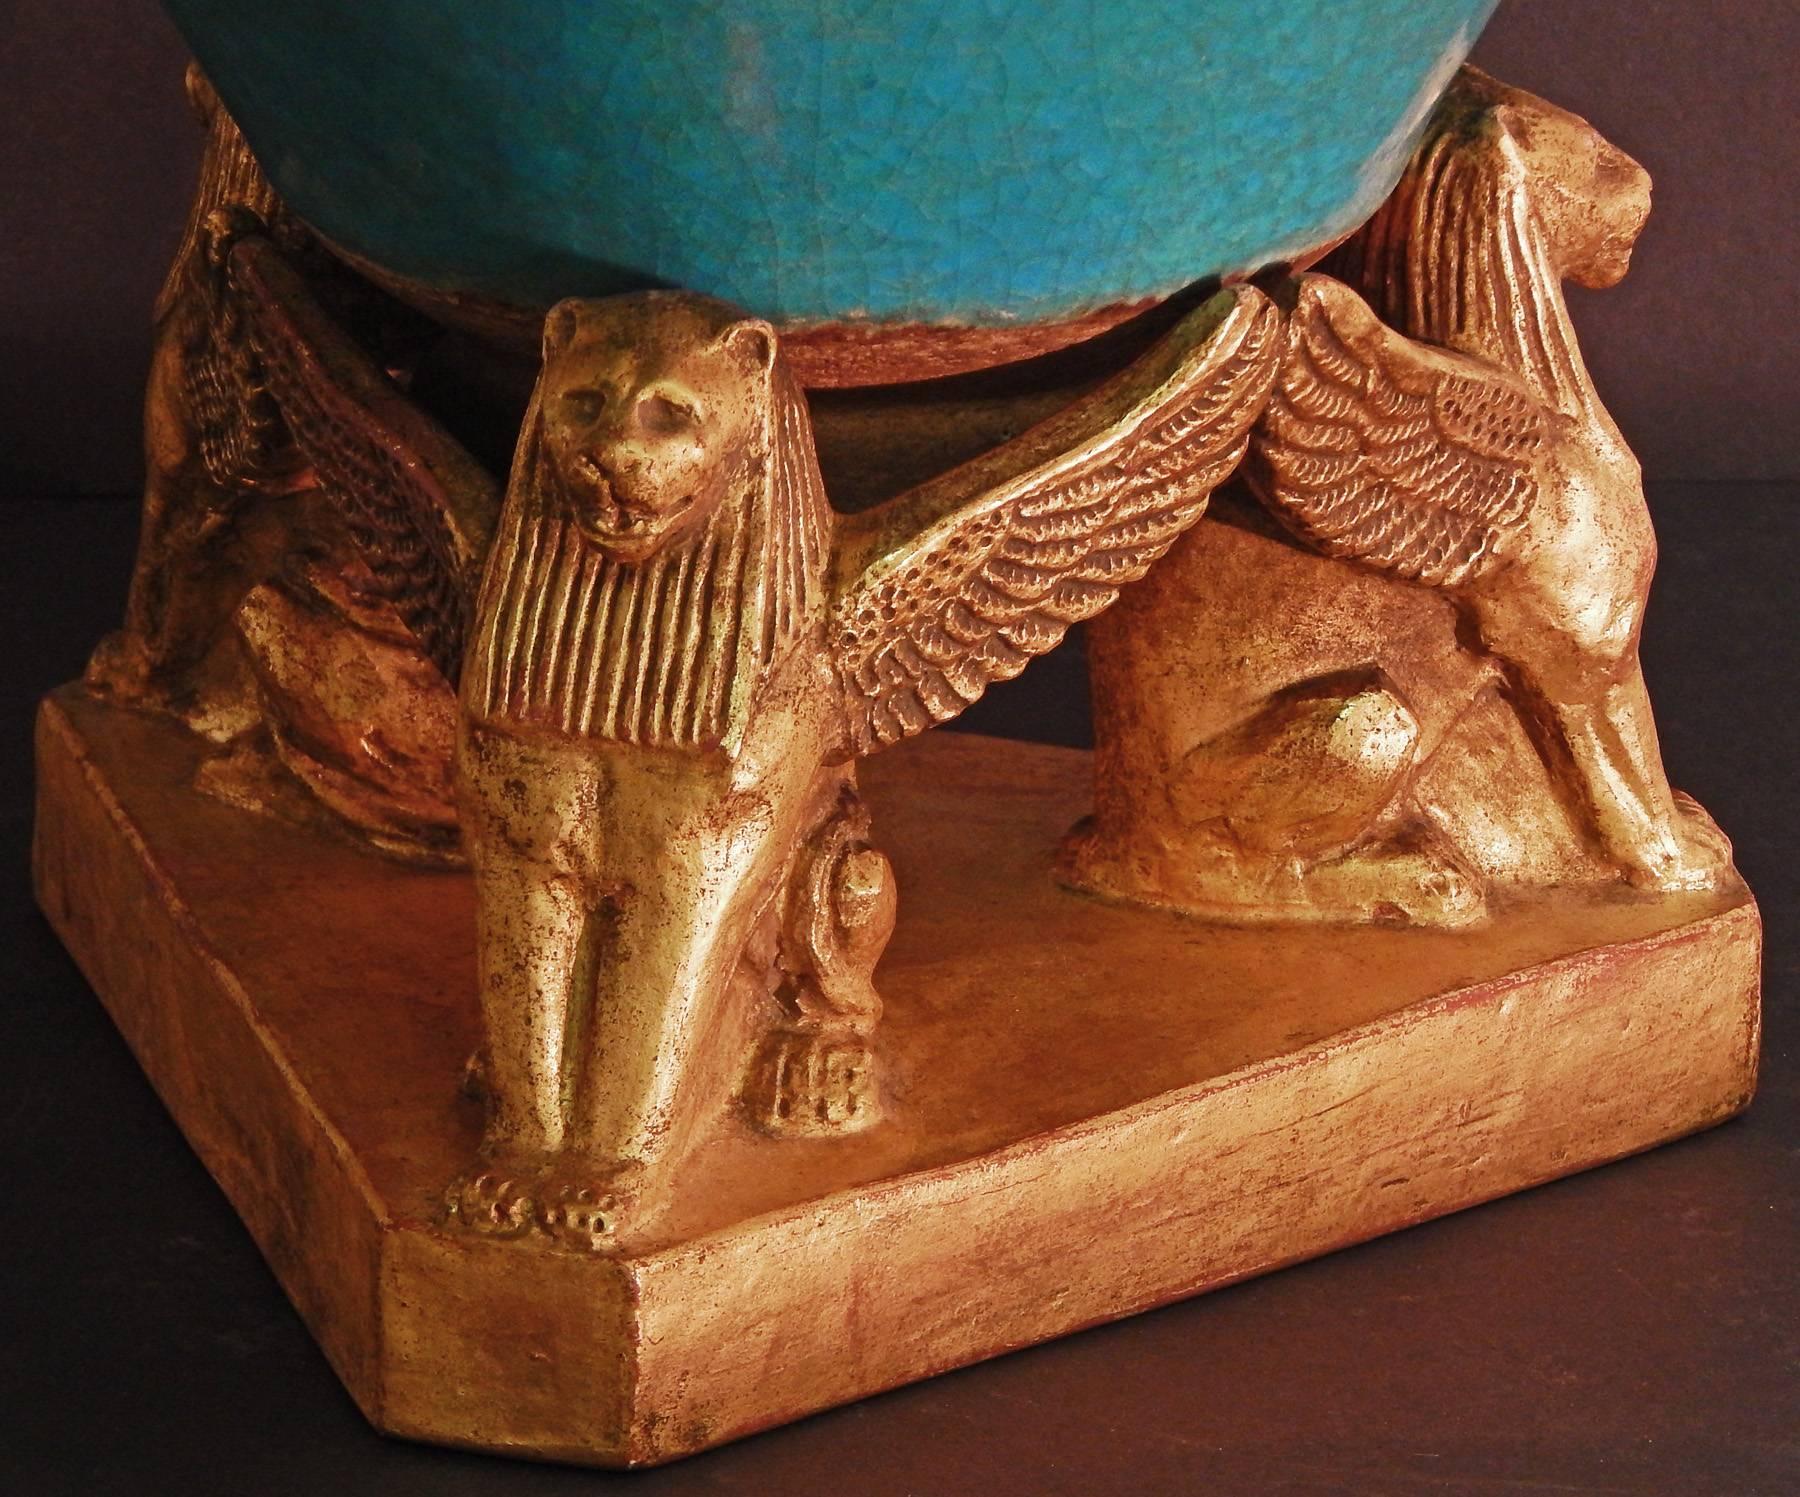 Fabulous and rare, this large, stunning Egyptian Revival bowl resting on a gold-glazed base with three winged lion figures was made in 1919 by Leon Volkmar in Bedford Village, New York. The brilliant blue glaze of the bowl -- which borrows from